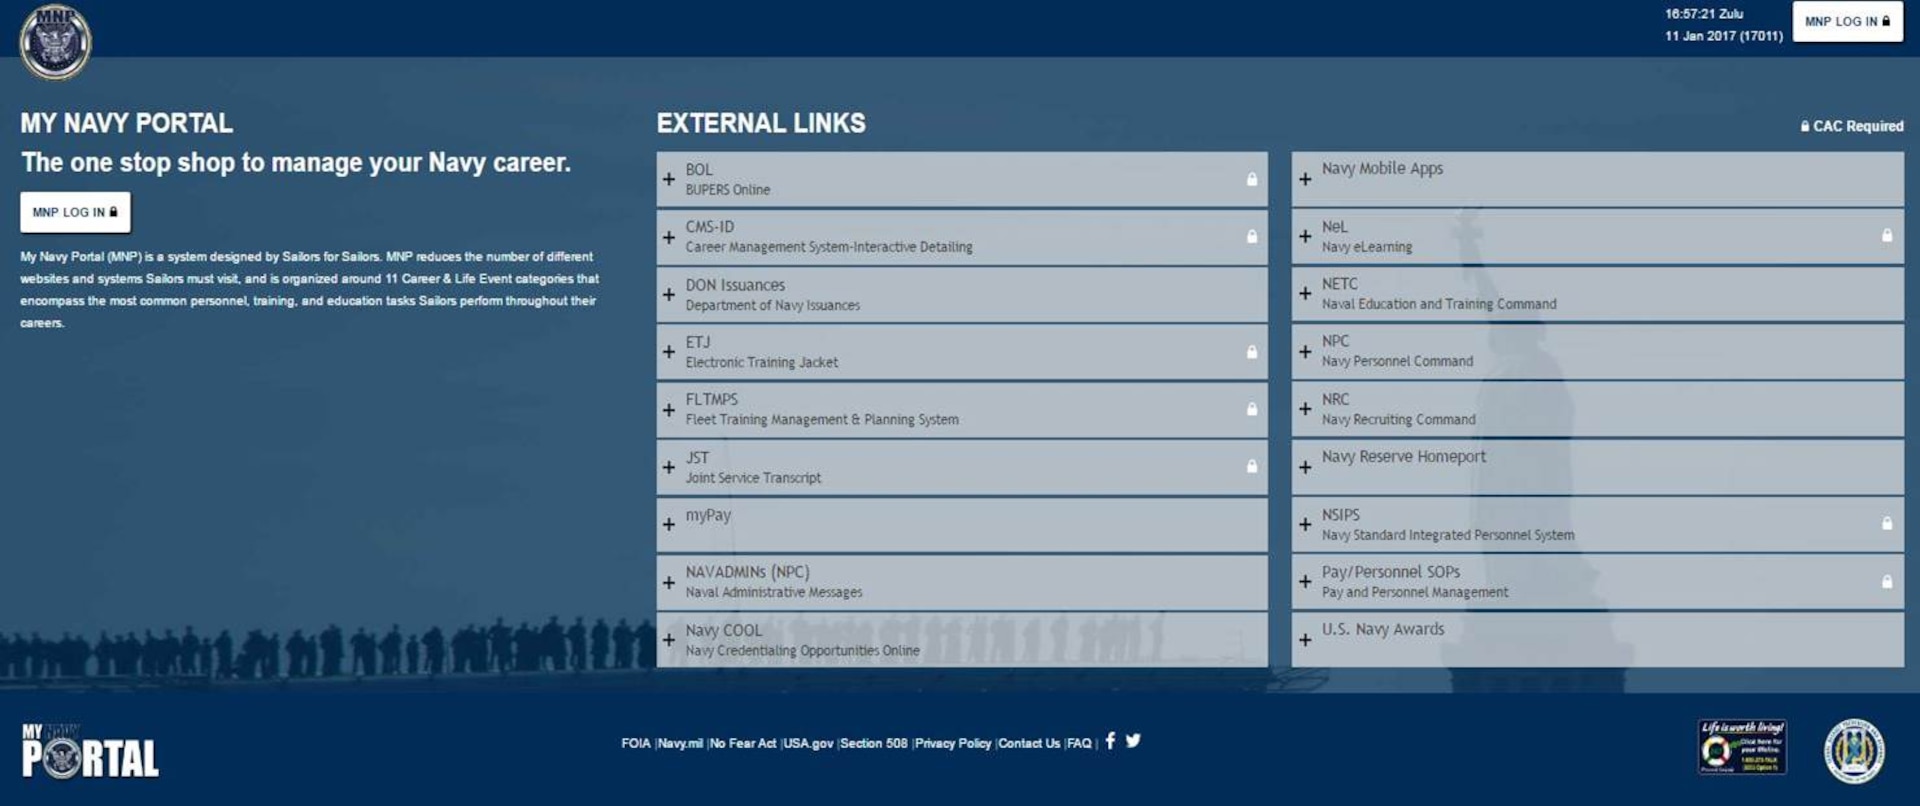 My Navy Portal is a single self-service portal that consolidates personnel training and education websites into one location for Sailors to access their information. The portal is intended to become the central online location for Sailors to access all of their personnel information.